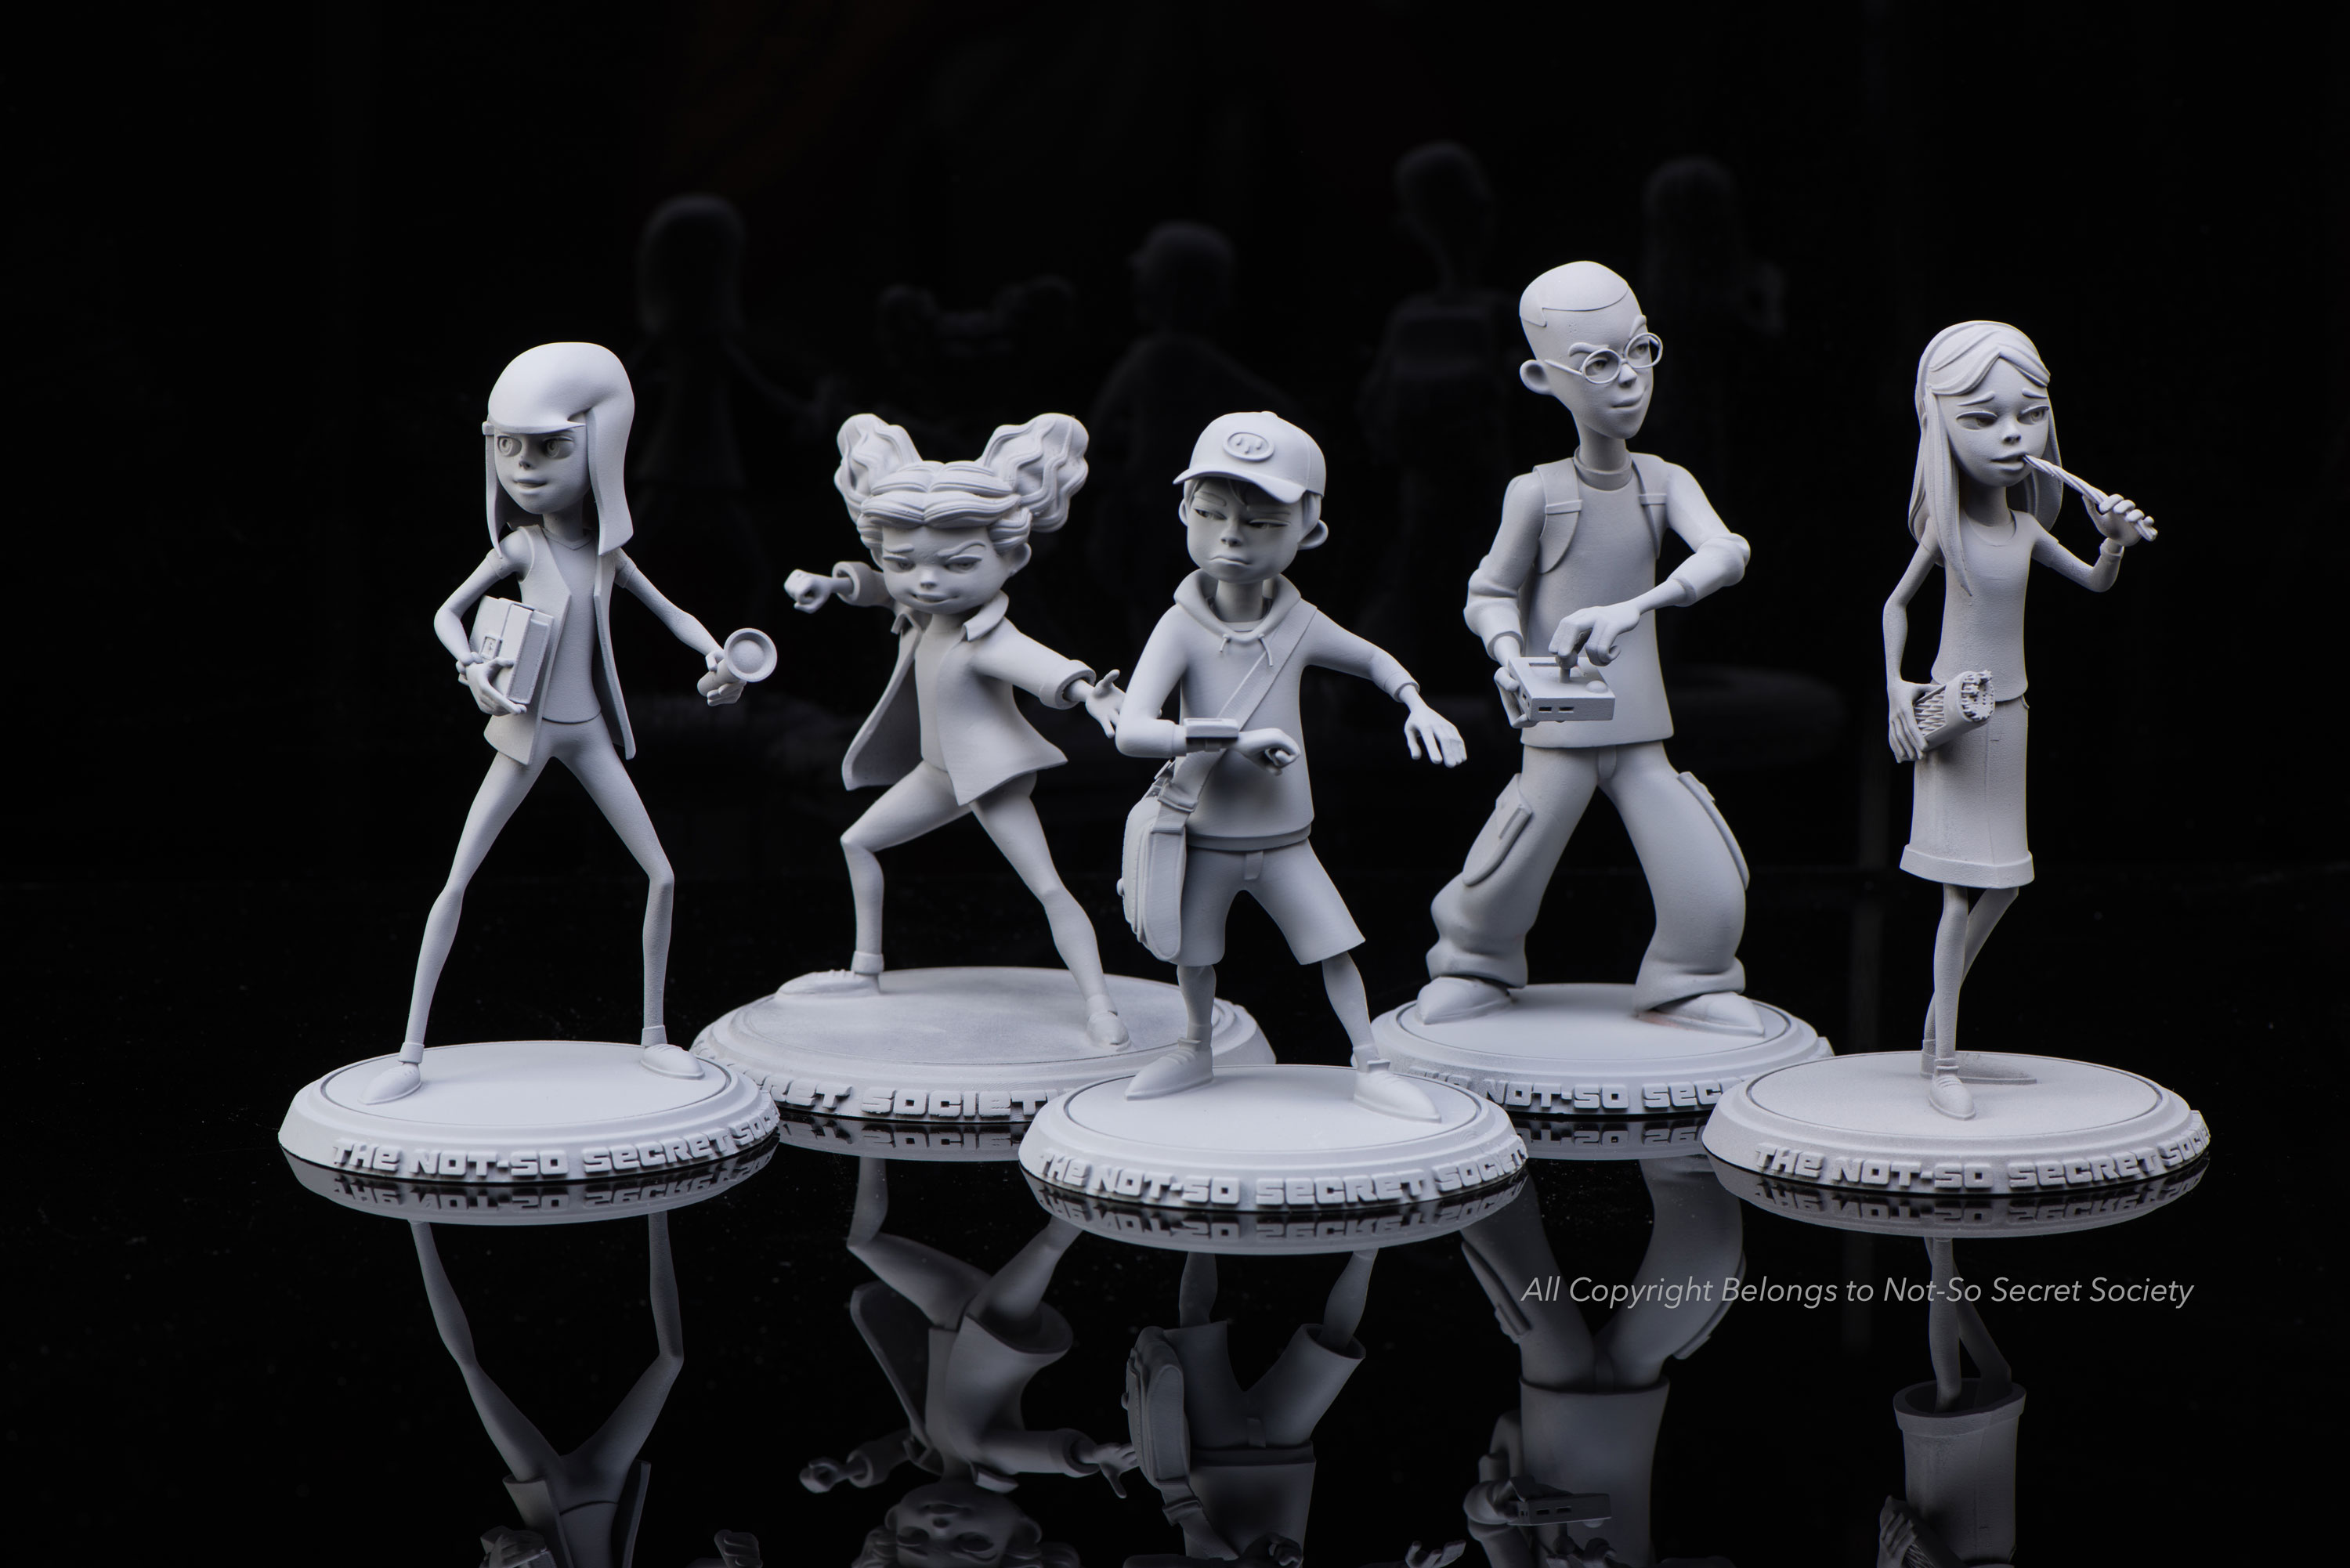 3d printed The not-so secret society characters